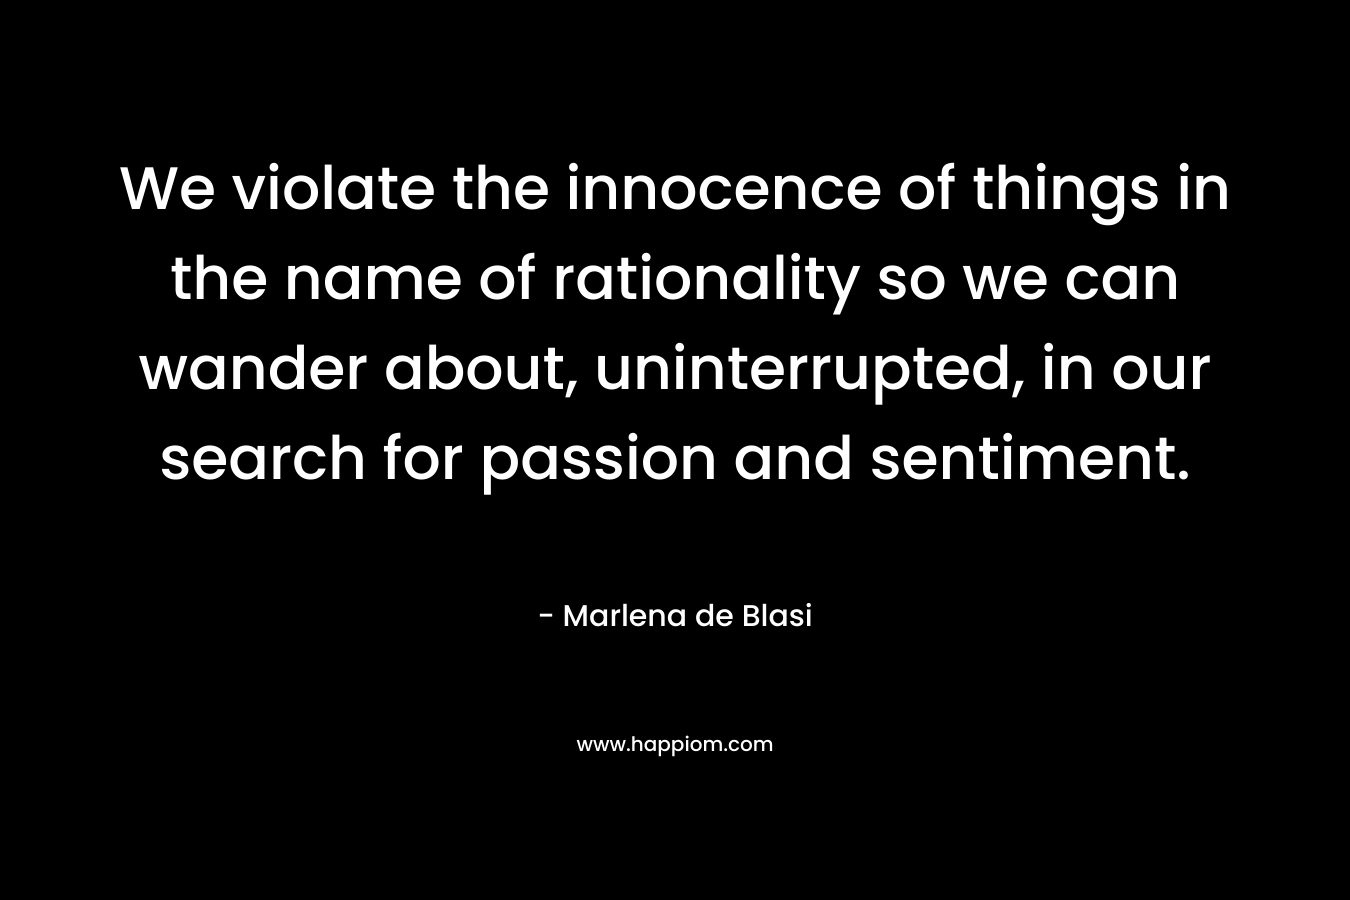 We violate the innocence of things in the name of rationality so we can wander about, uninterrupted, in our search for passion and sentiment. – Marlena de Blasi